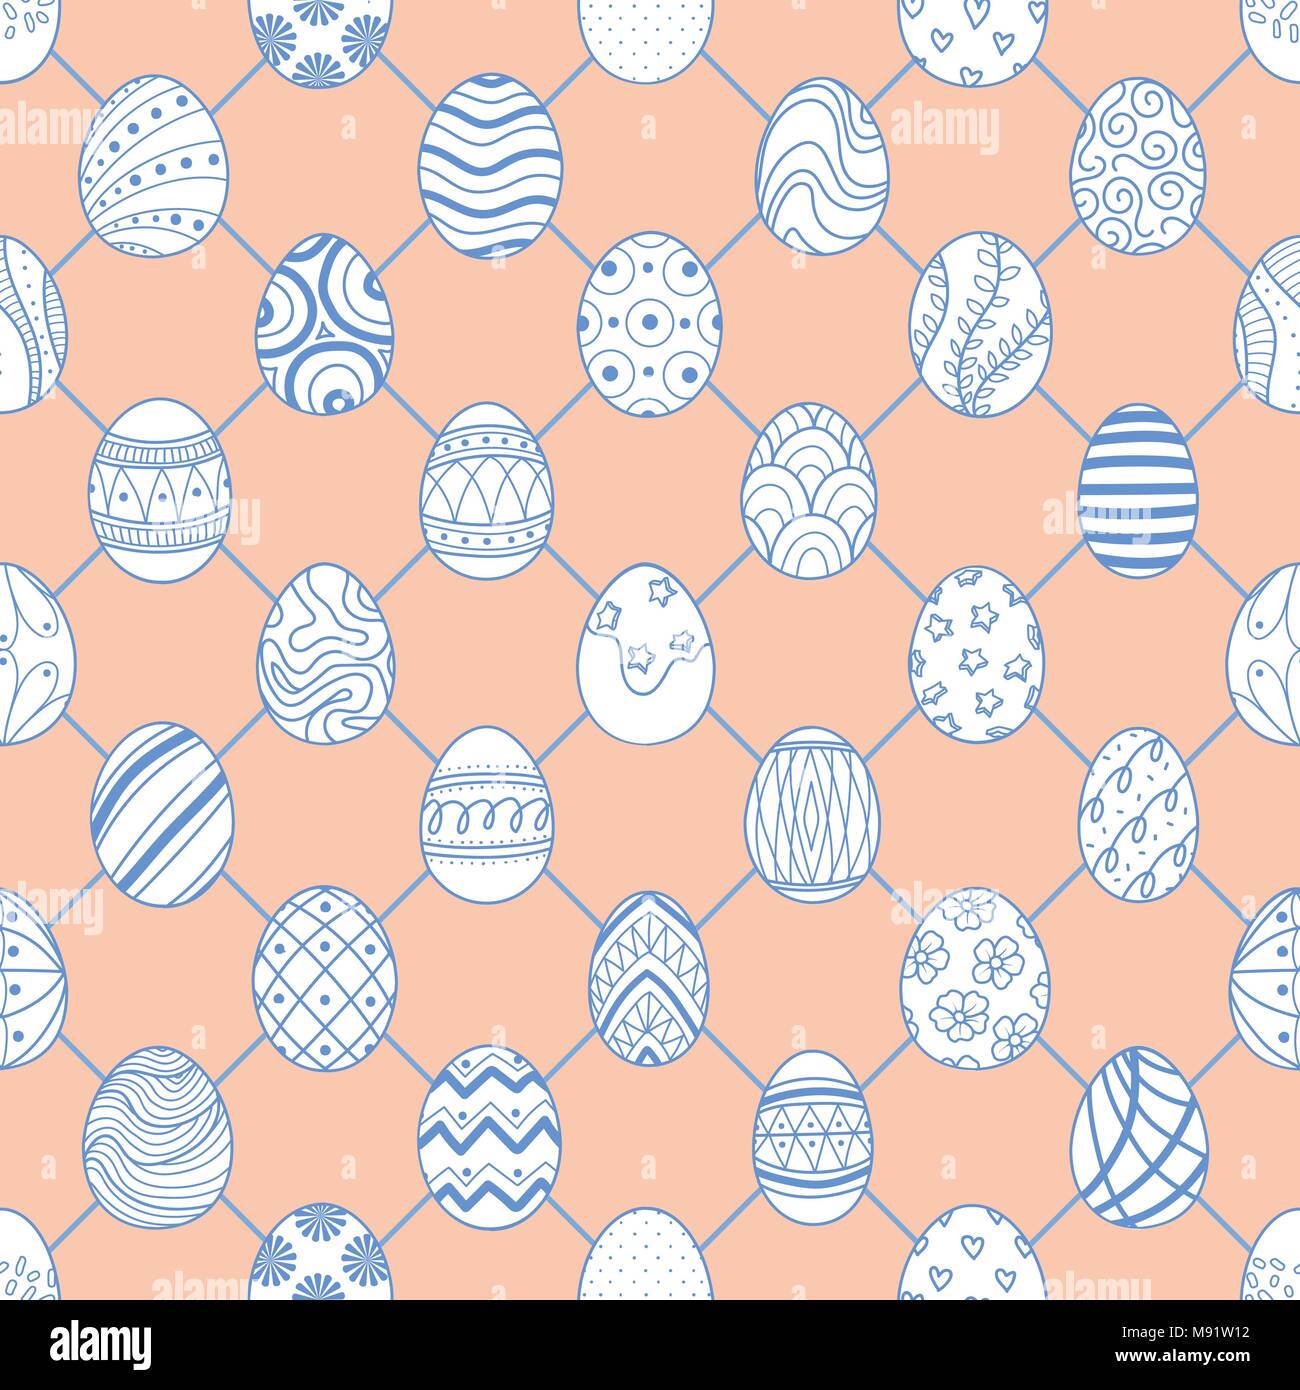 Cute Easter eggs in blue outline and white plane are at junctions on pastel pink background. Cute hand drawn seamless pattern design for Easter festiv Stock Vector